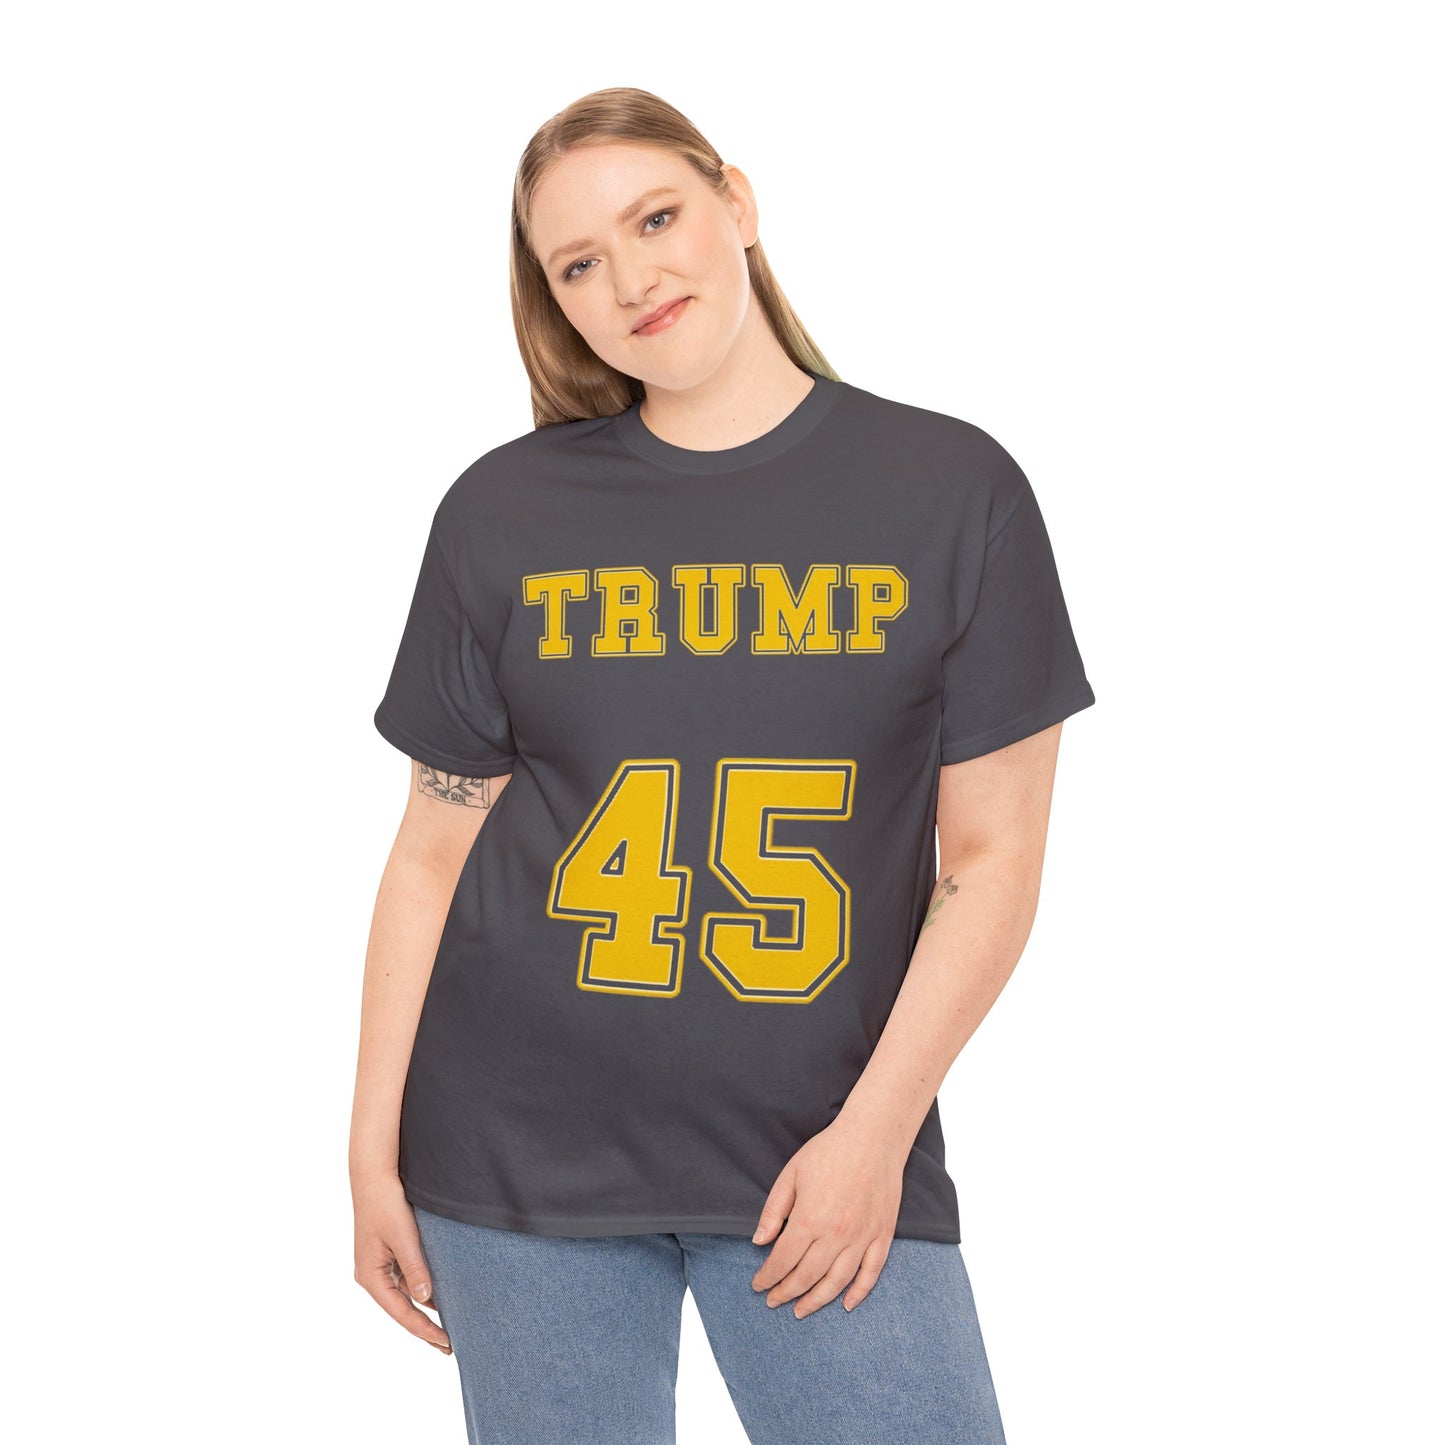 Trump 45 on front and Trump 47 on the back Shirt Trump Merch